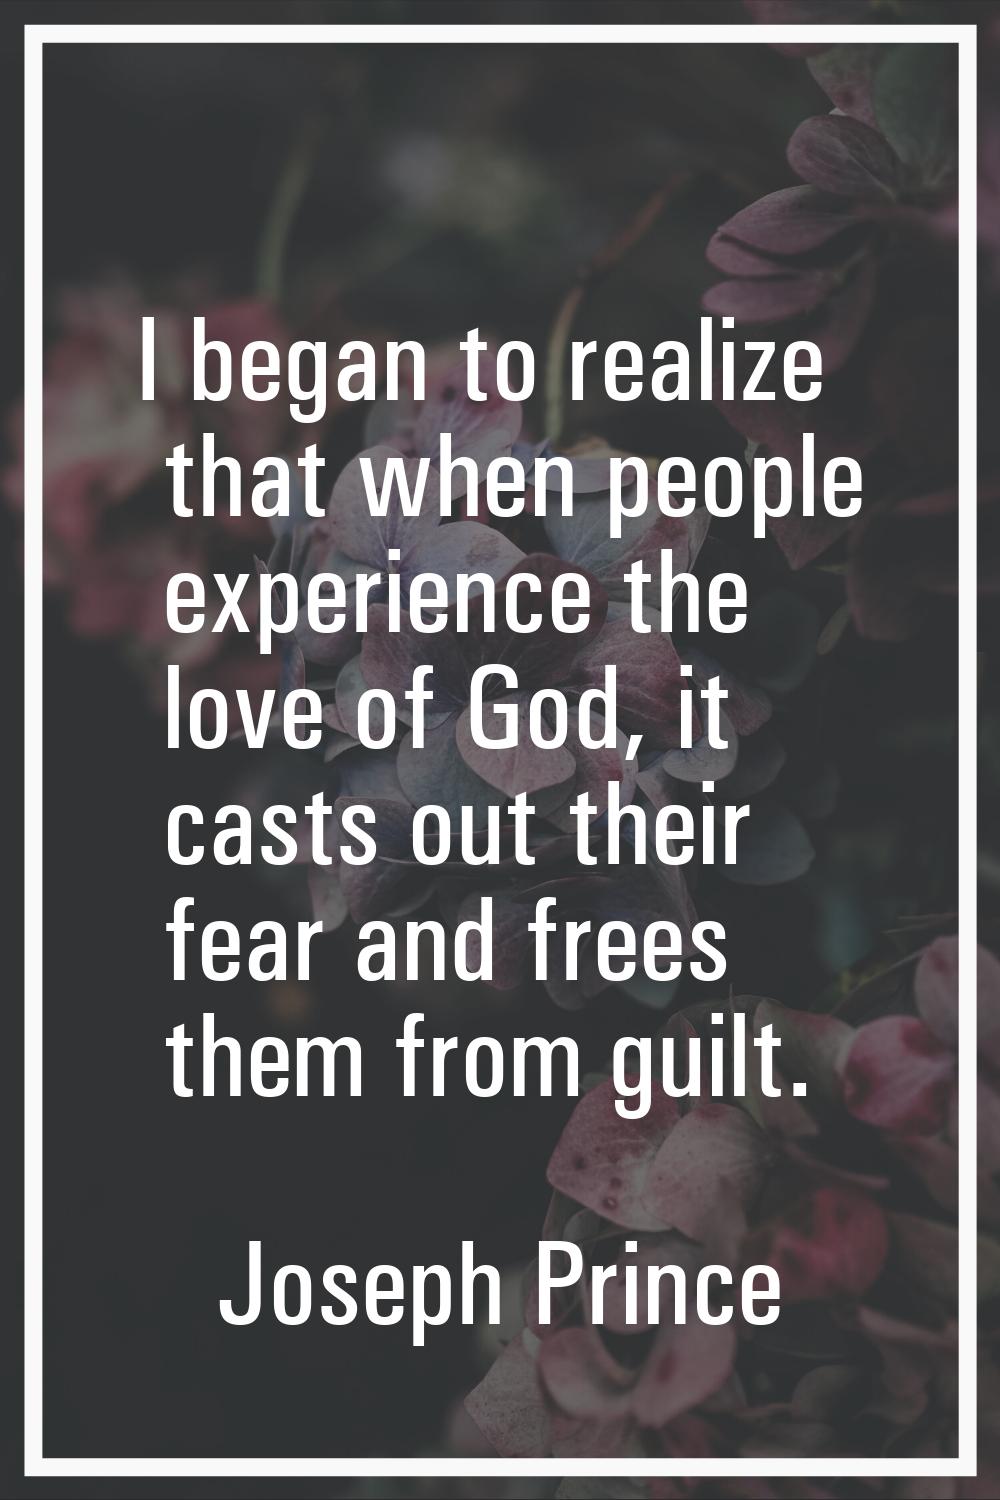 I began to realize that when people experience the love of God, it casts out their fear and frees t